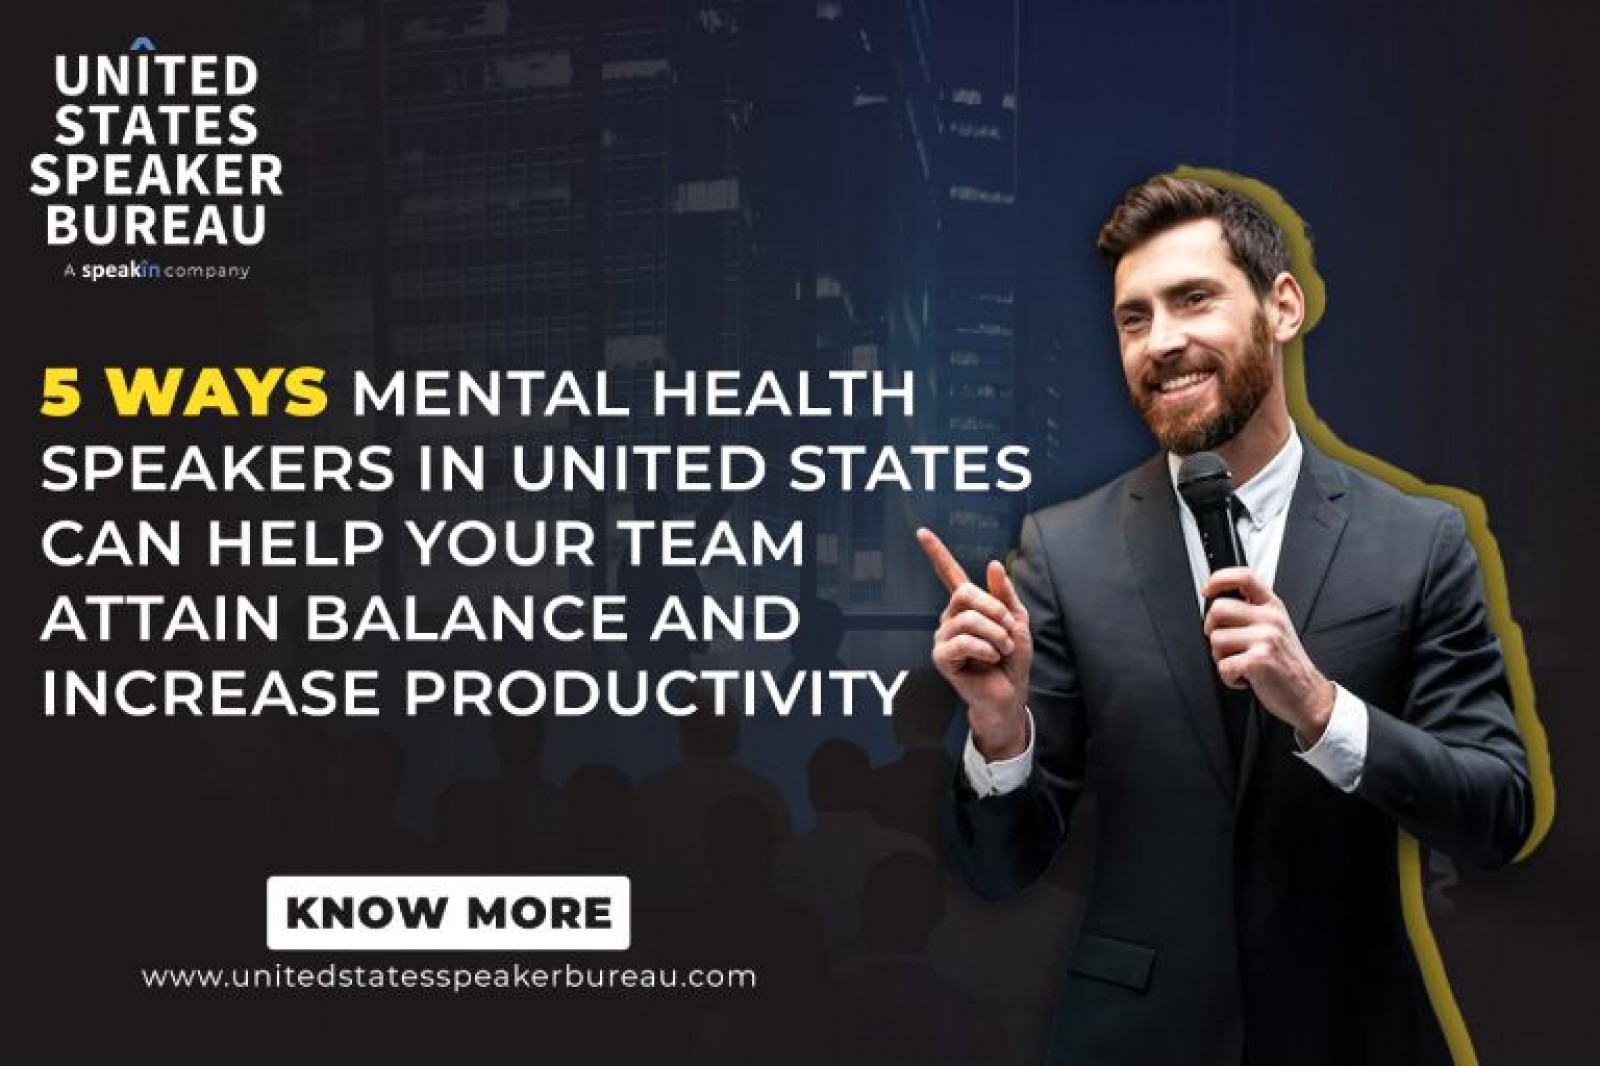 5 Ways Mental Health Speakers In United States Can Help Your Team Attain Balance and Increase Productivity